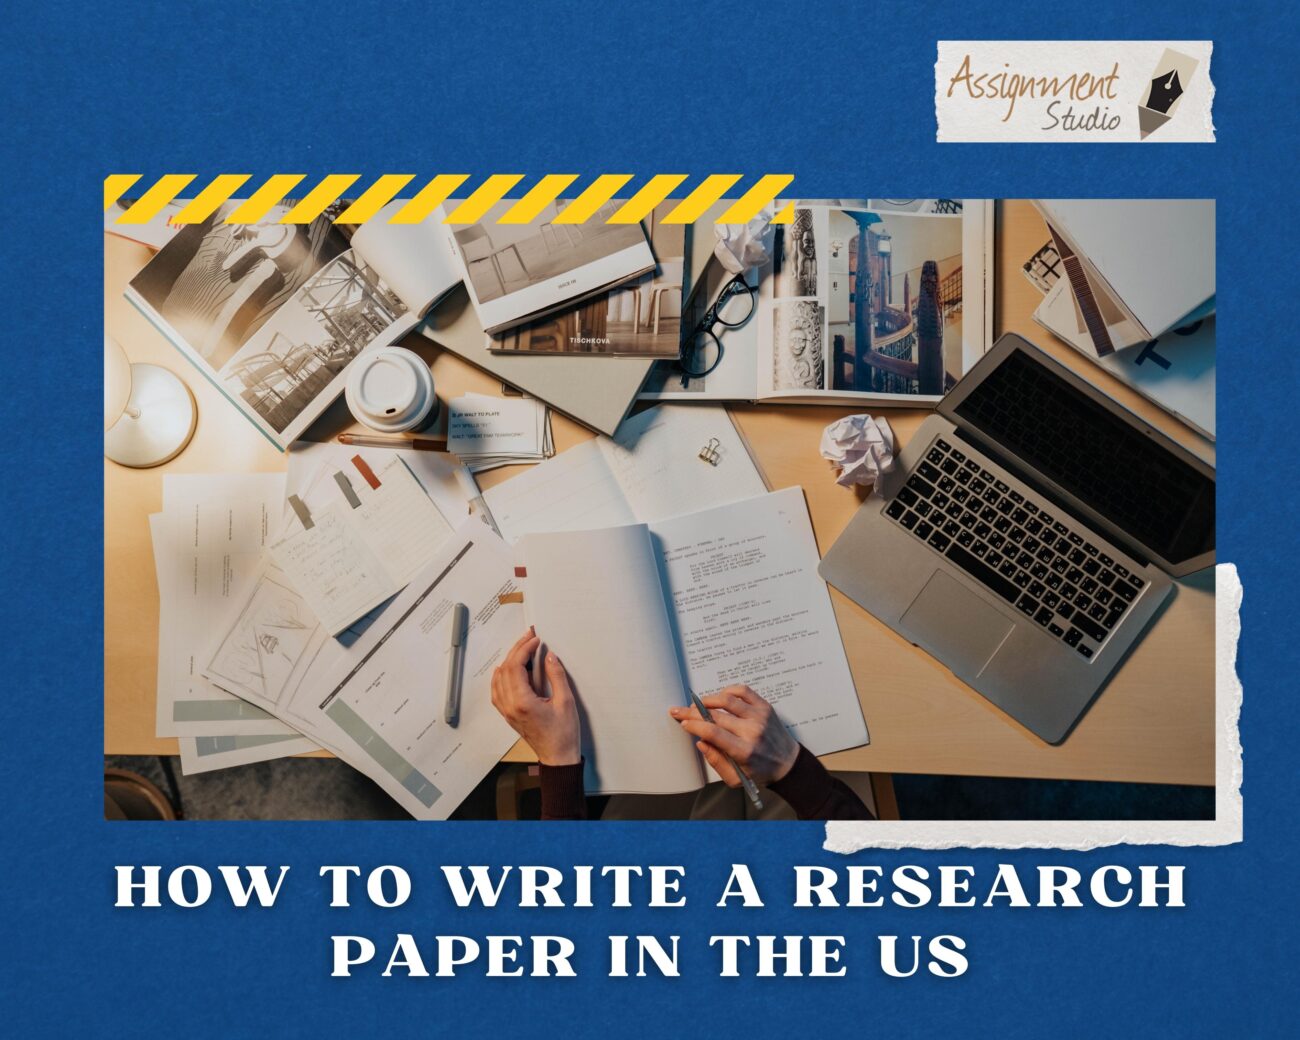 How to Write a Research Paper in The US